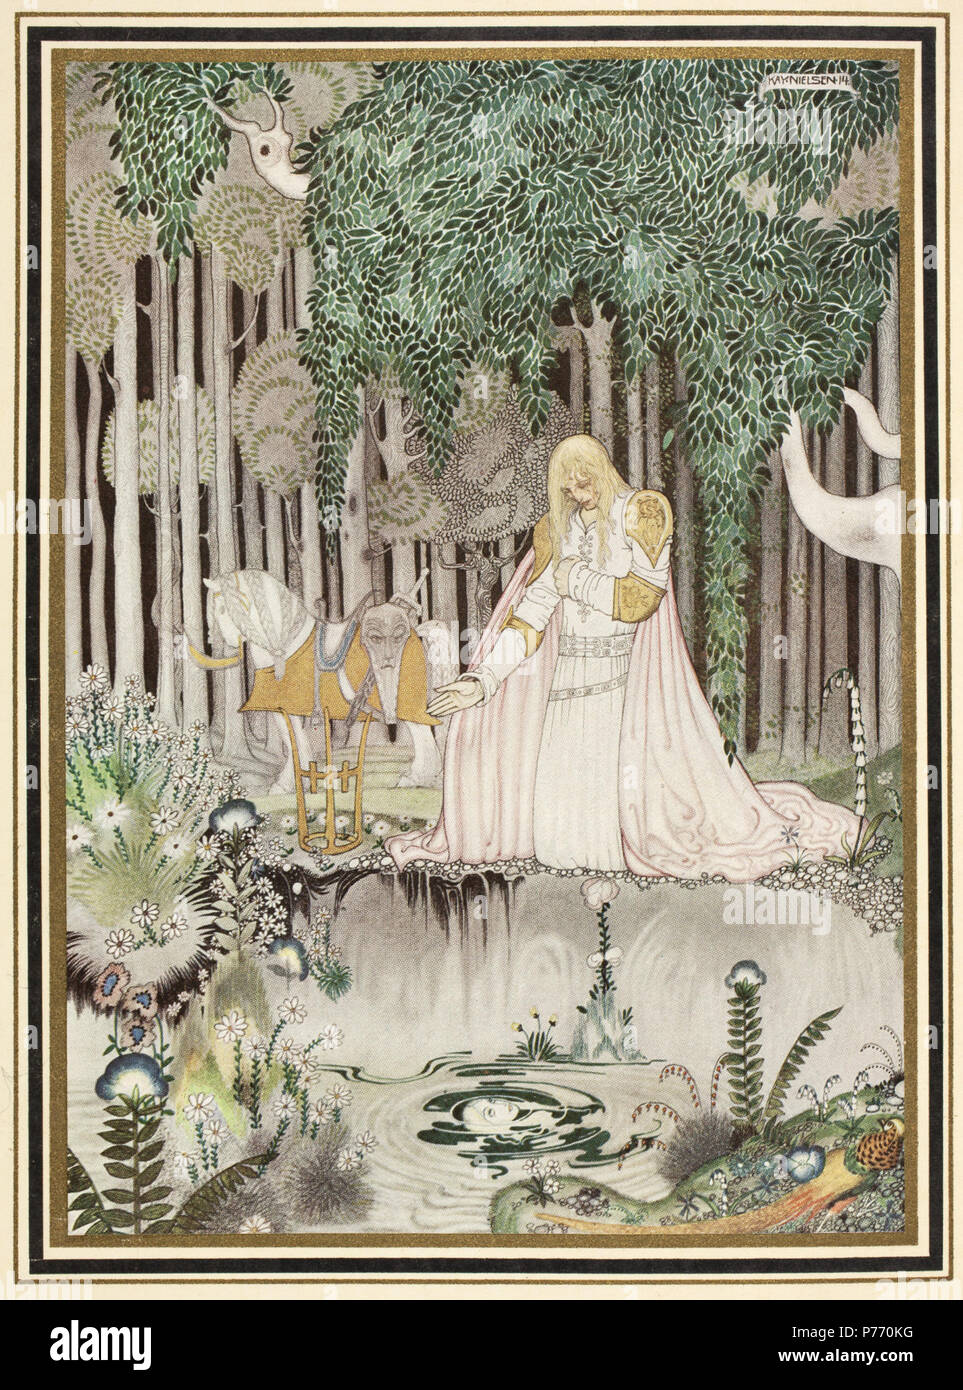 English: ‘He too saw the image in the water; but he looked up at once, and became aware of the lovely Lassie who sat there up in the tree’ Illustration by Kay Nielsen in East of the sun and west of the moon (1914). In the early twentieth century several English publishers issued a series of collector’s editions of children’s literature. These gift books, specially bound in gold-tooled vellum, were elaborately illustrated with coloured plates by the best illustrators of the time such as Arthur Rackham, Edmund Dulac, Hugh Thomson, and Heath Robinson. One of the most stunning is East of the sun a Stock Photo